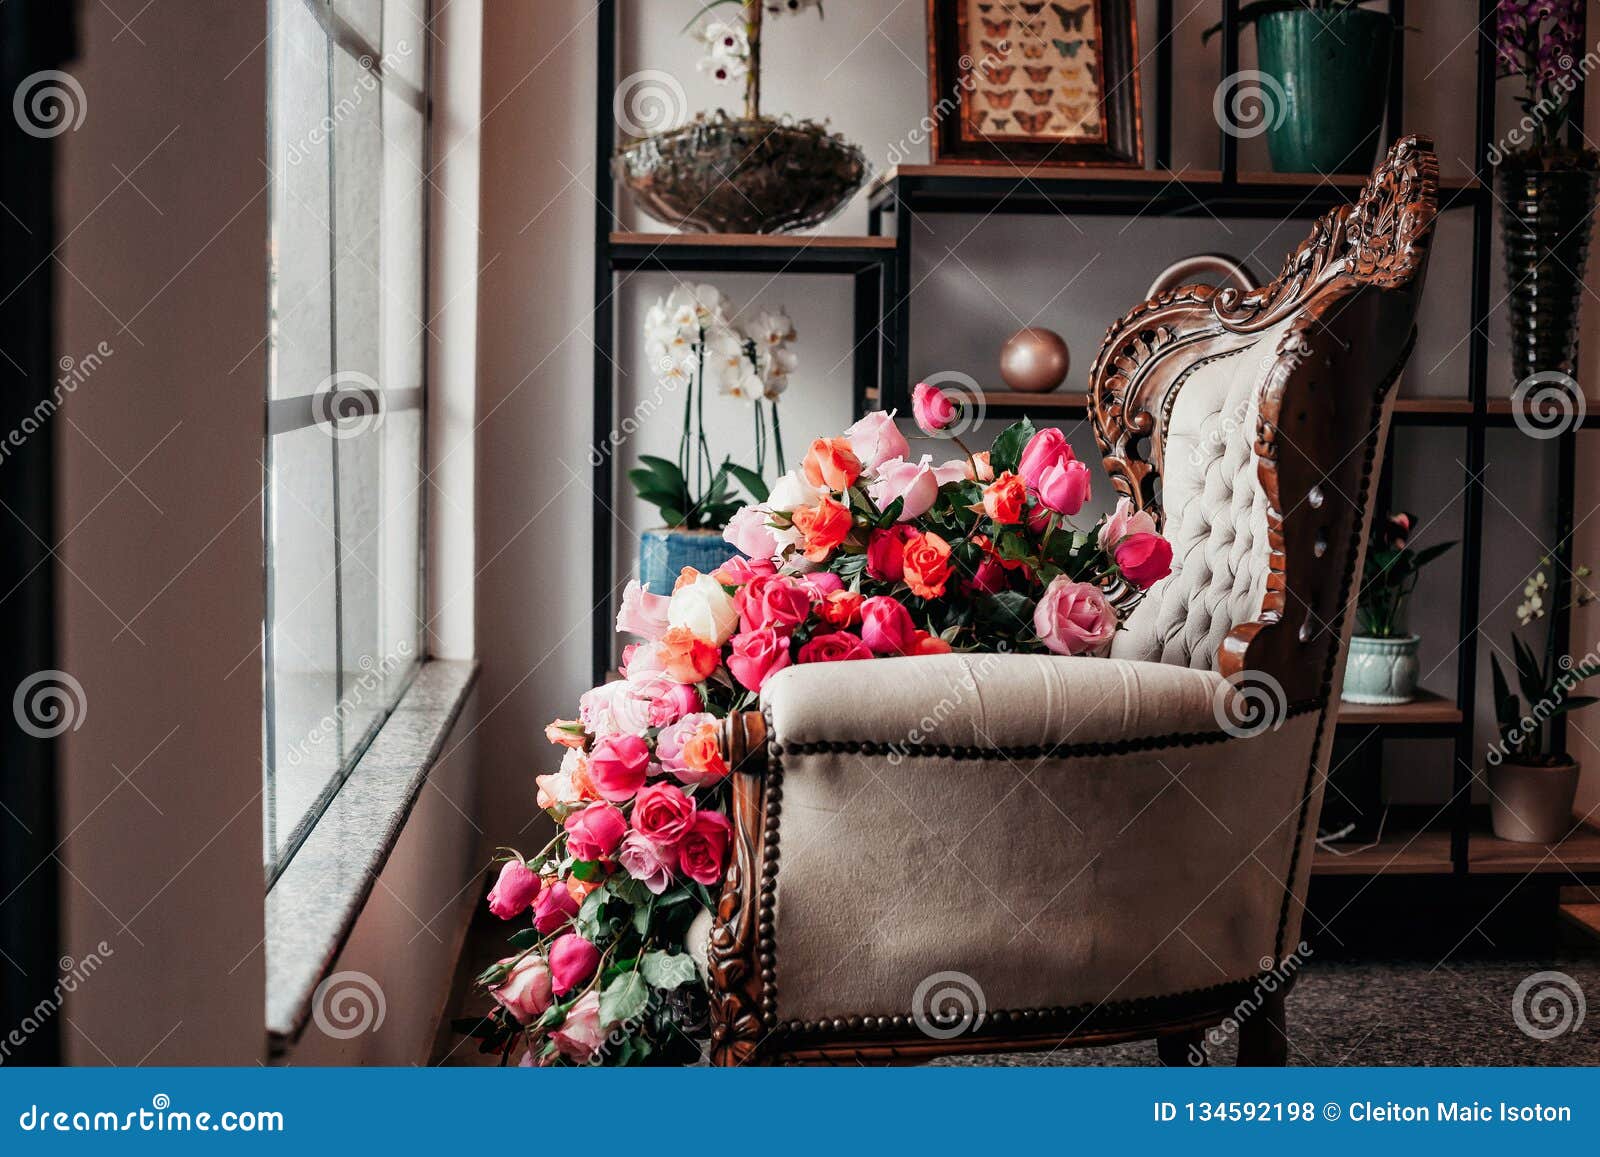 a vitrine from a flower shop with chair and flowers